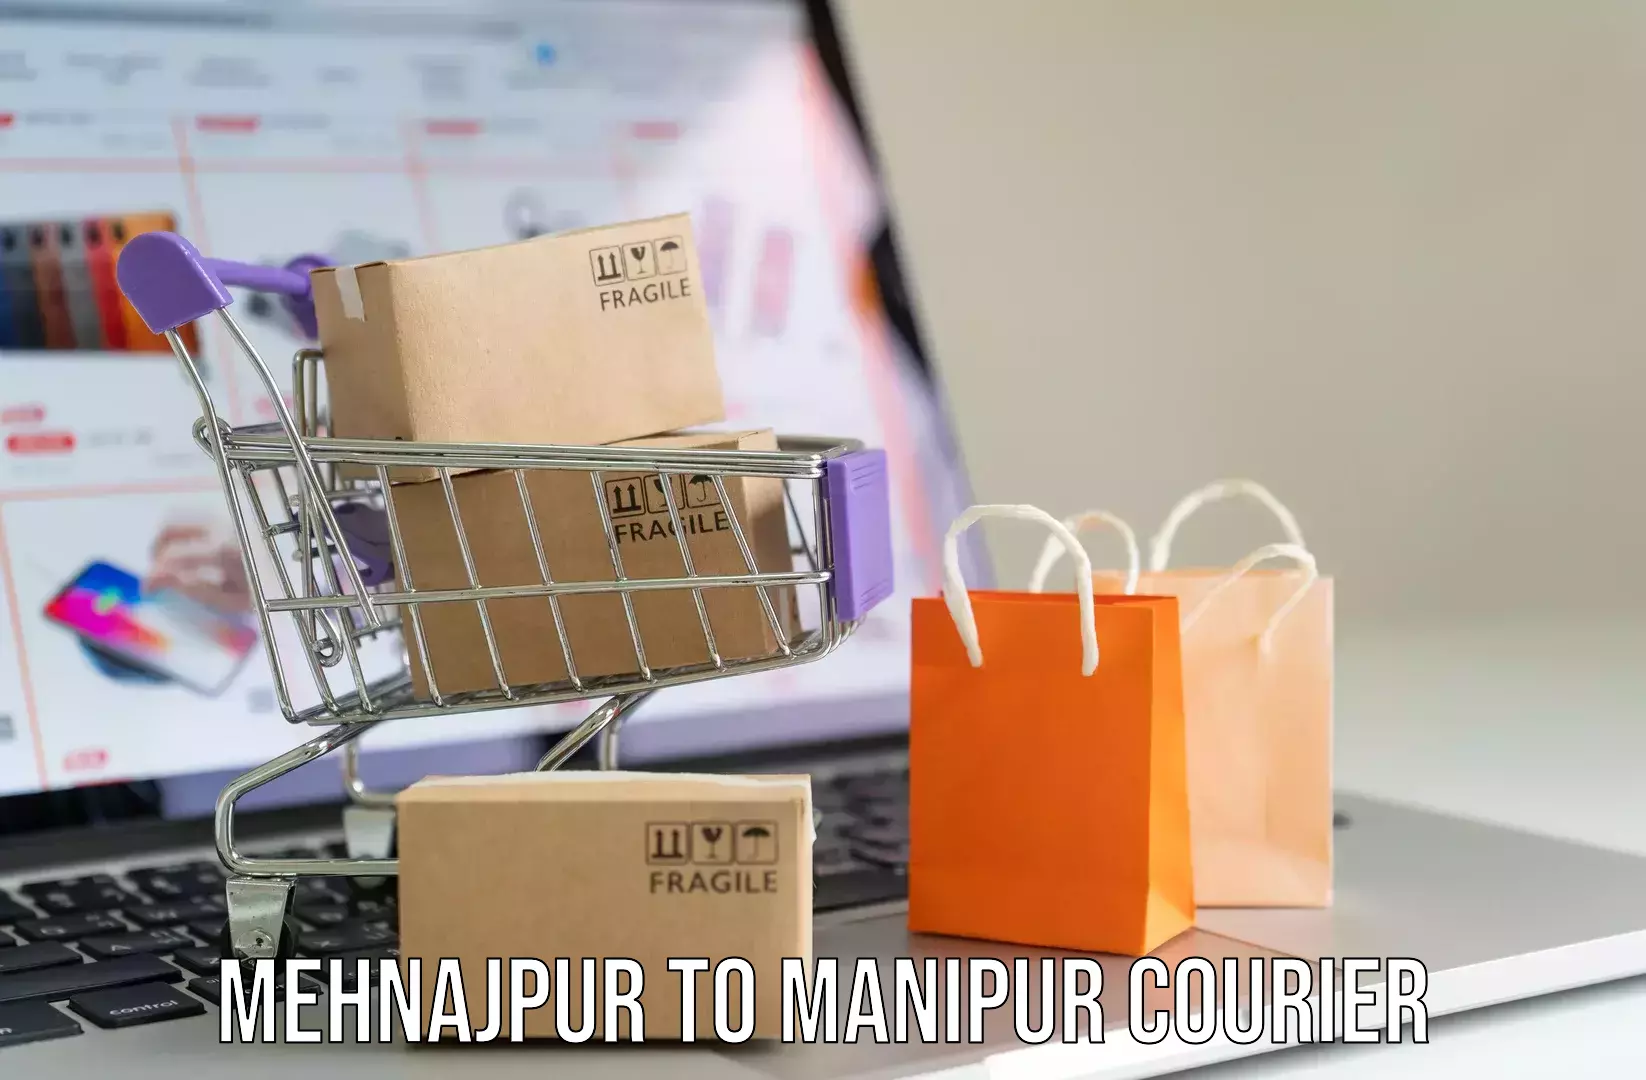 Luggage delivery network Mehnajpur to Manipur